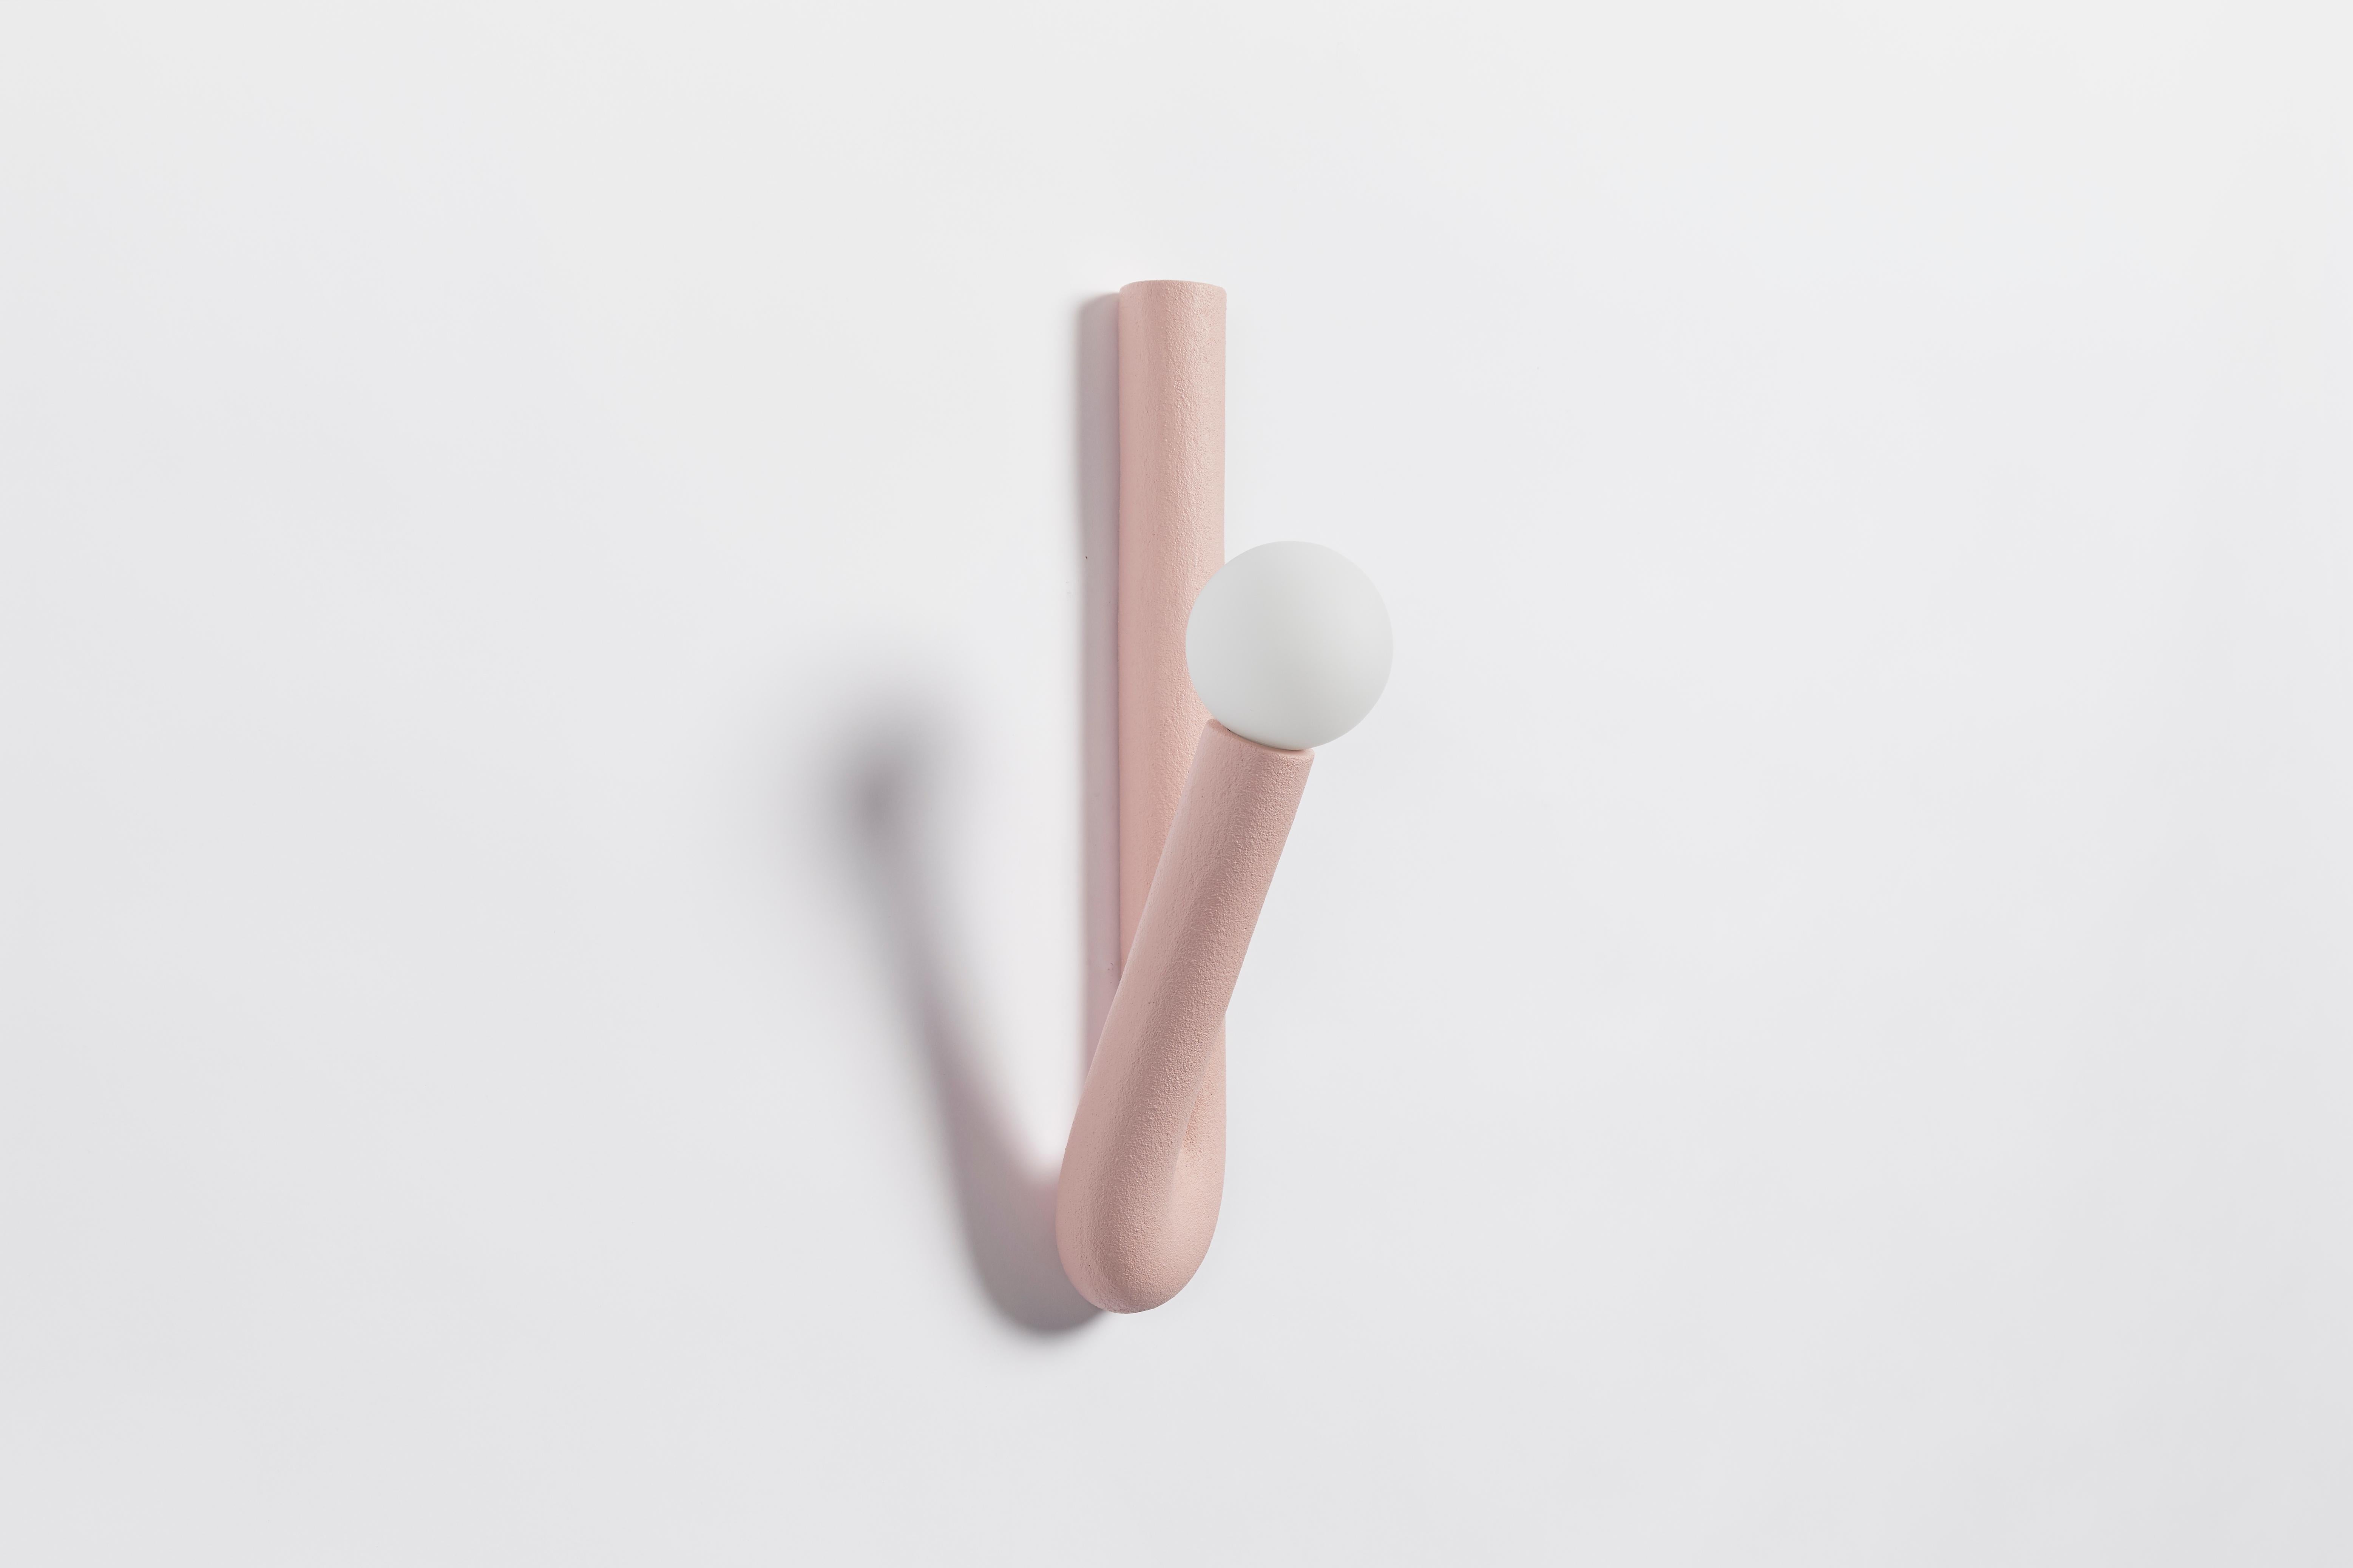 Hotel light 02 wall lamp by Hot Wire Extensions
Limited edition
Materials: Waste SLS 3D nylon powder, Sand from sustainable sources
Dimensions: L 14.5 x W 17.5 x H 47 cm 
Colour: pink
Also available in: aqua, cream, lemon, anthracite and grey

All